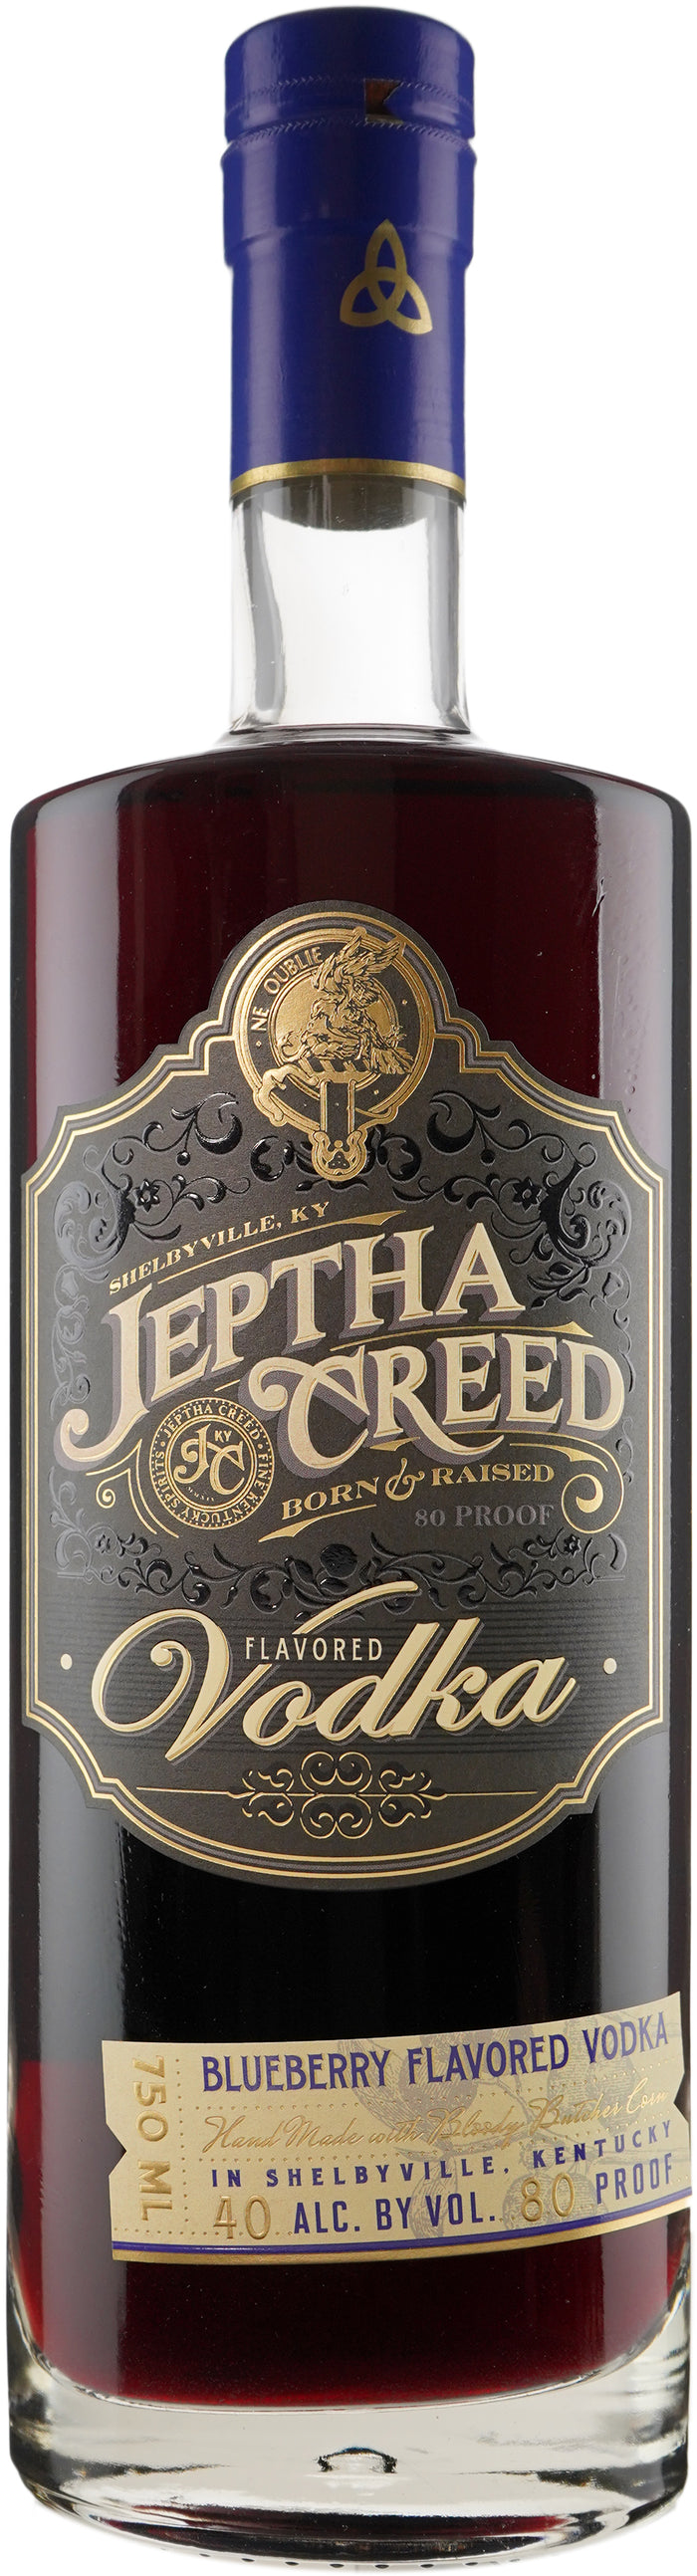 Jeptha Creed Blueberry Flavored Vodka